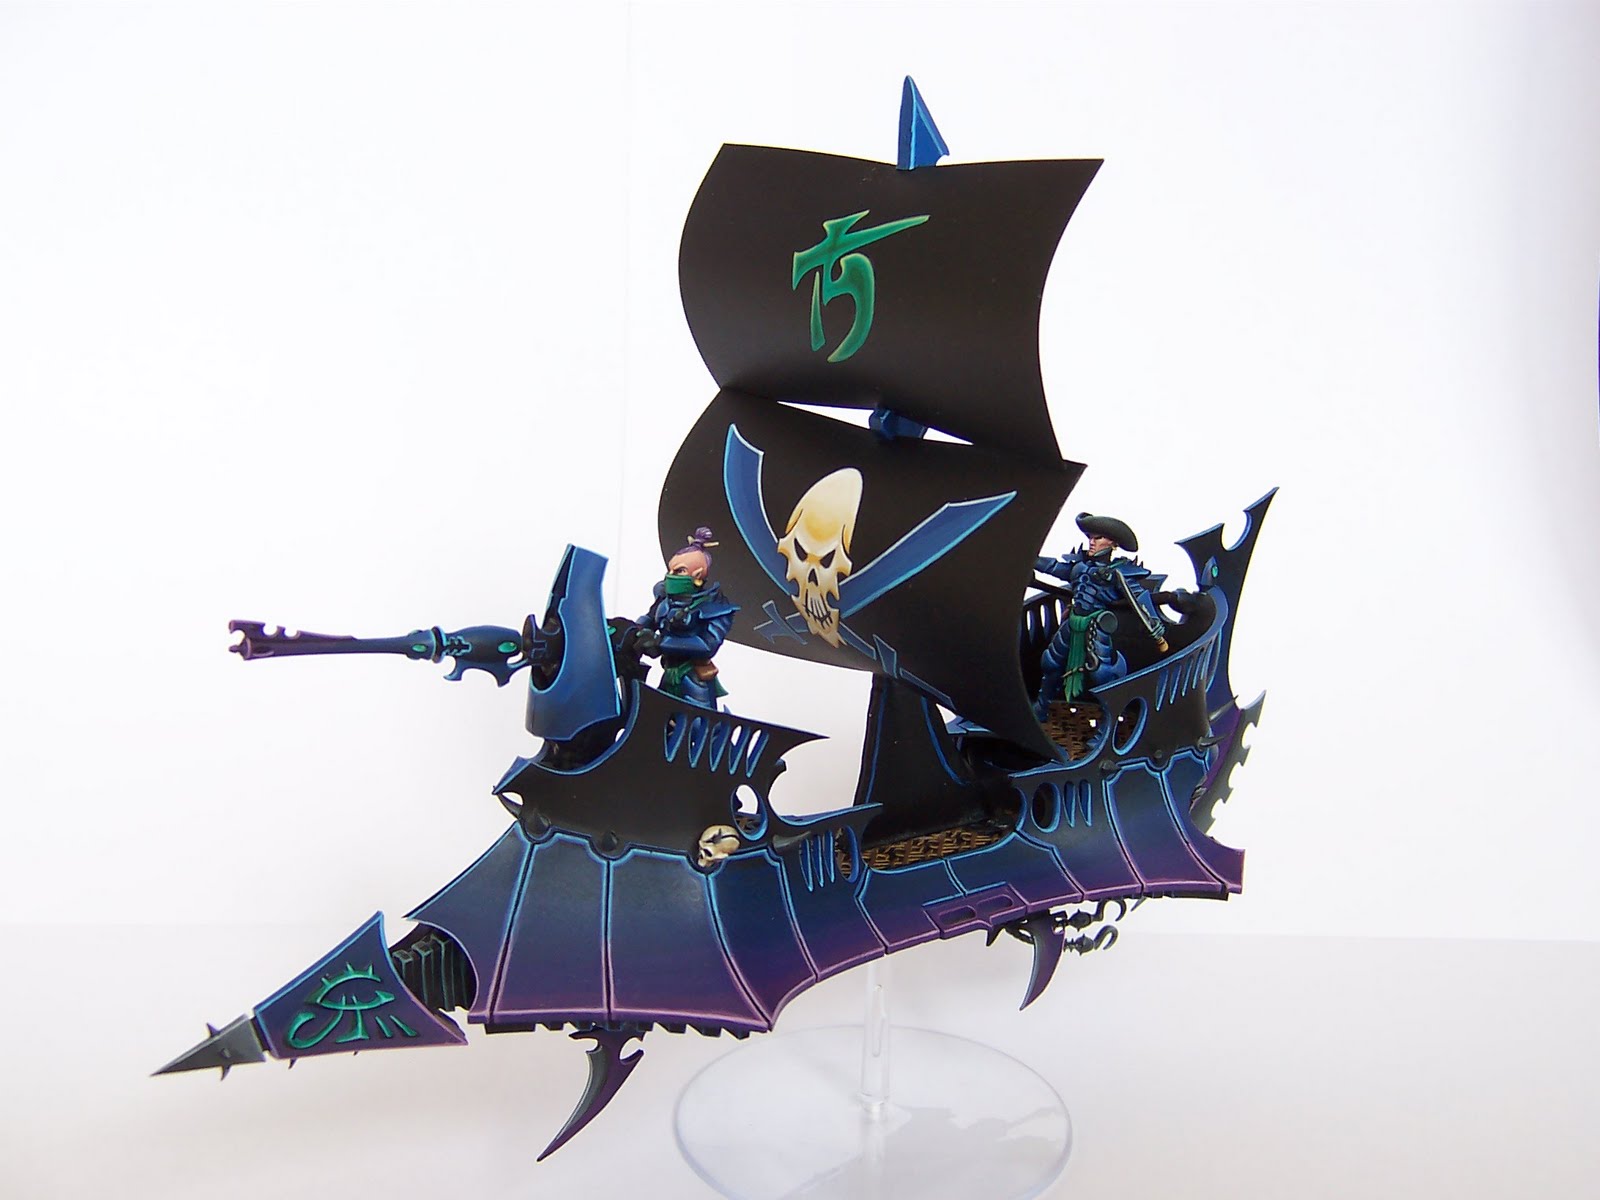 DE Pirate themed Army Pirate%2BShip%2B017